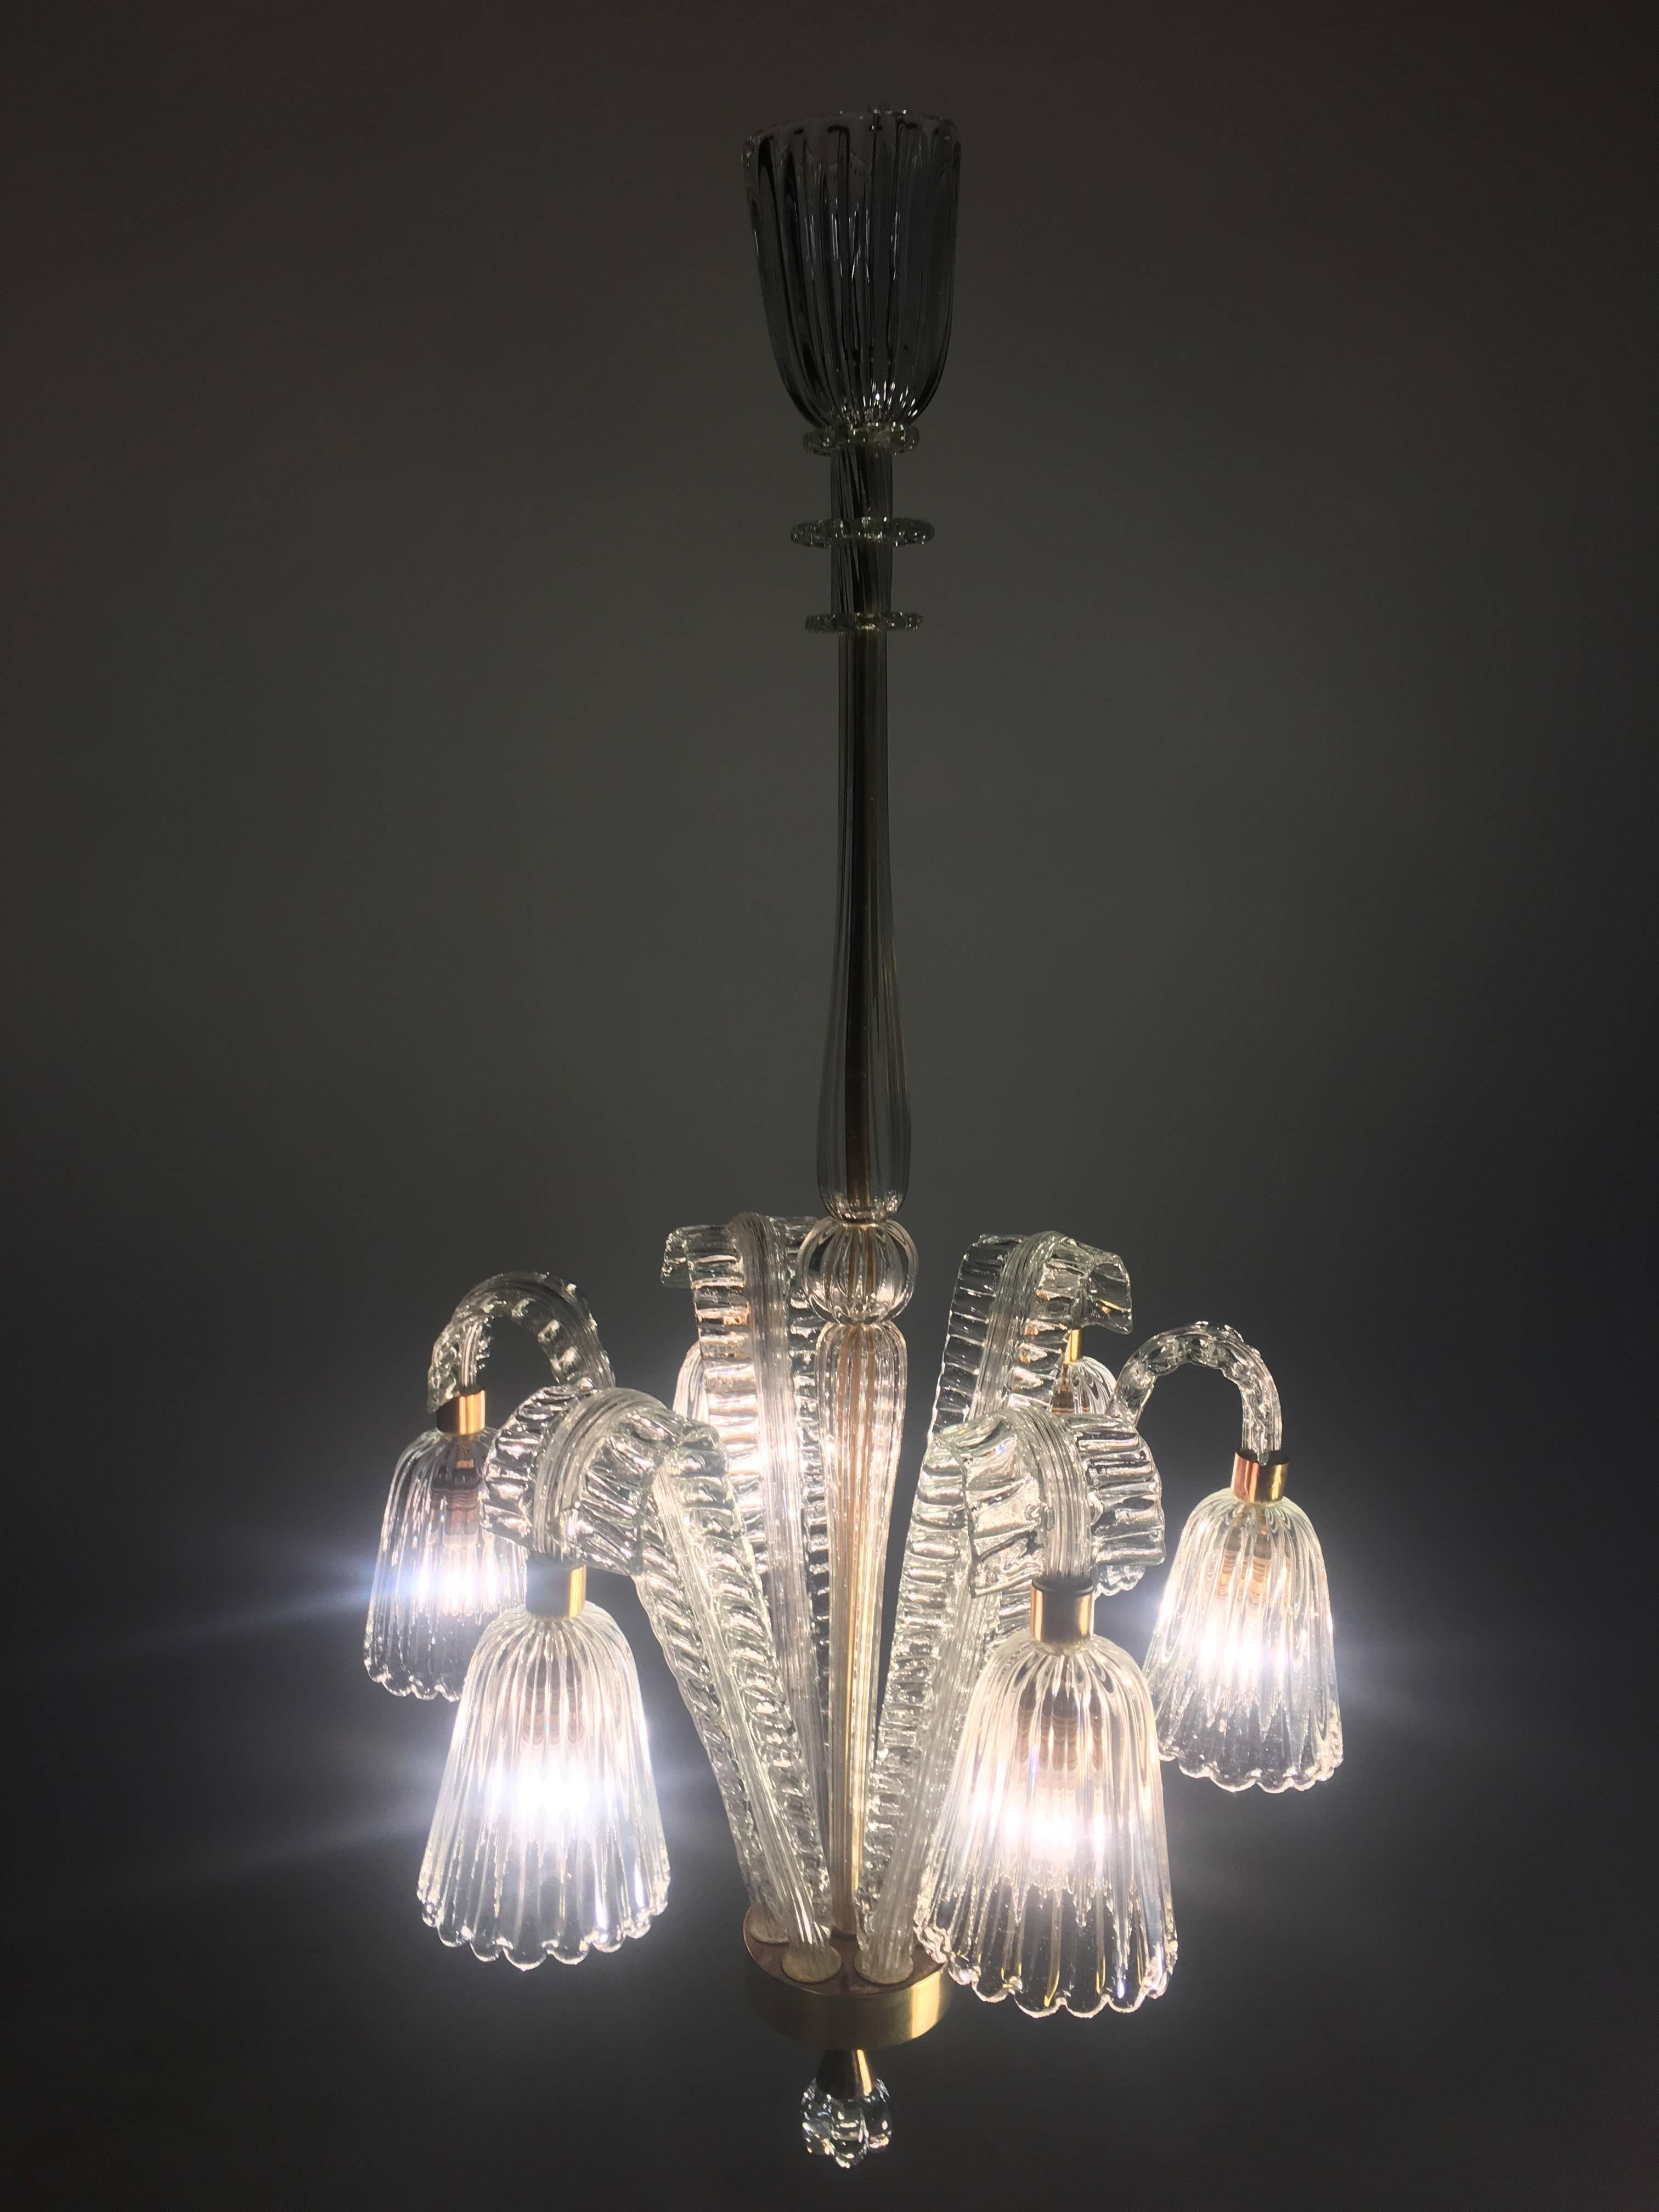 Charming Art Deco Chandelier by Ercole Barovier, Murano, 1940s For Sale 4